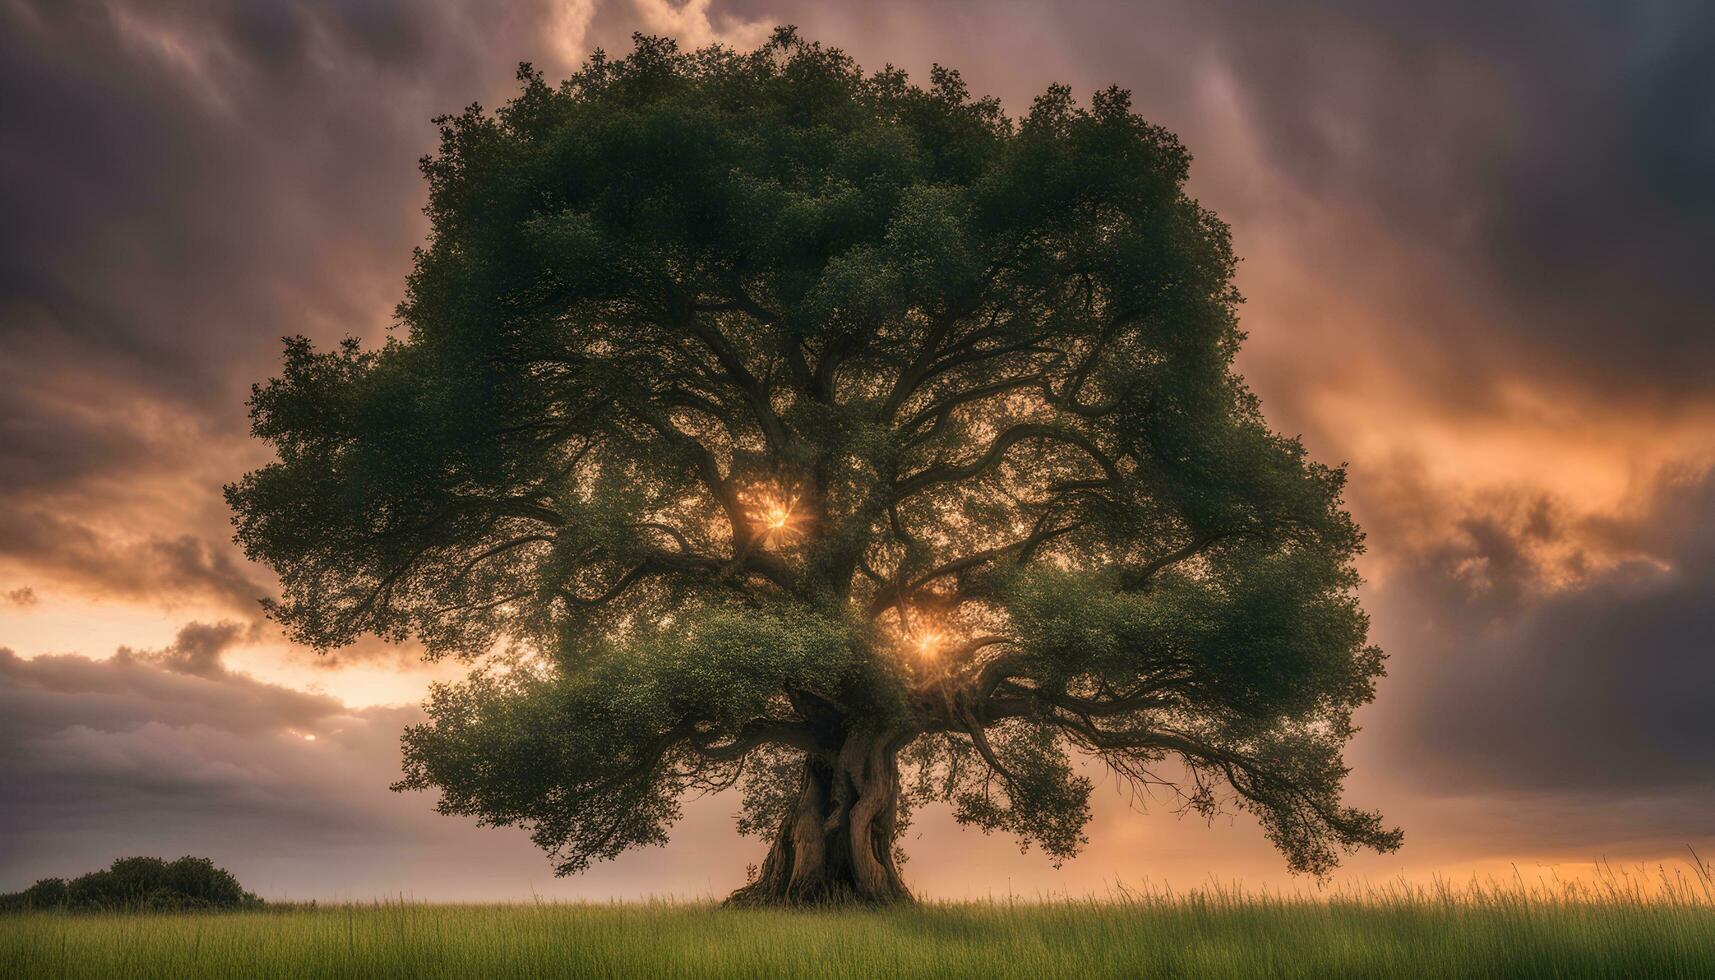 AI generated a large tree in a field with a dramatic sunset photo